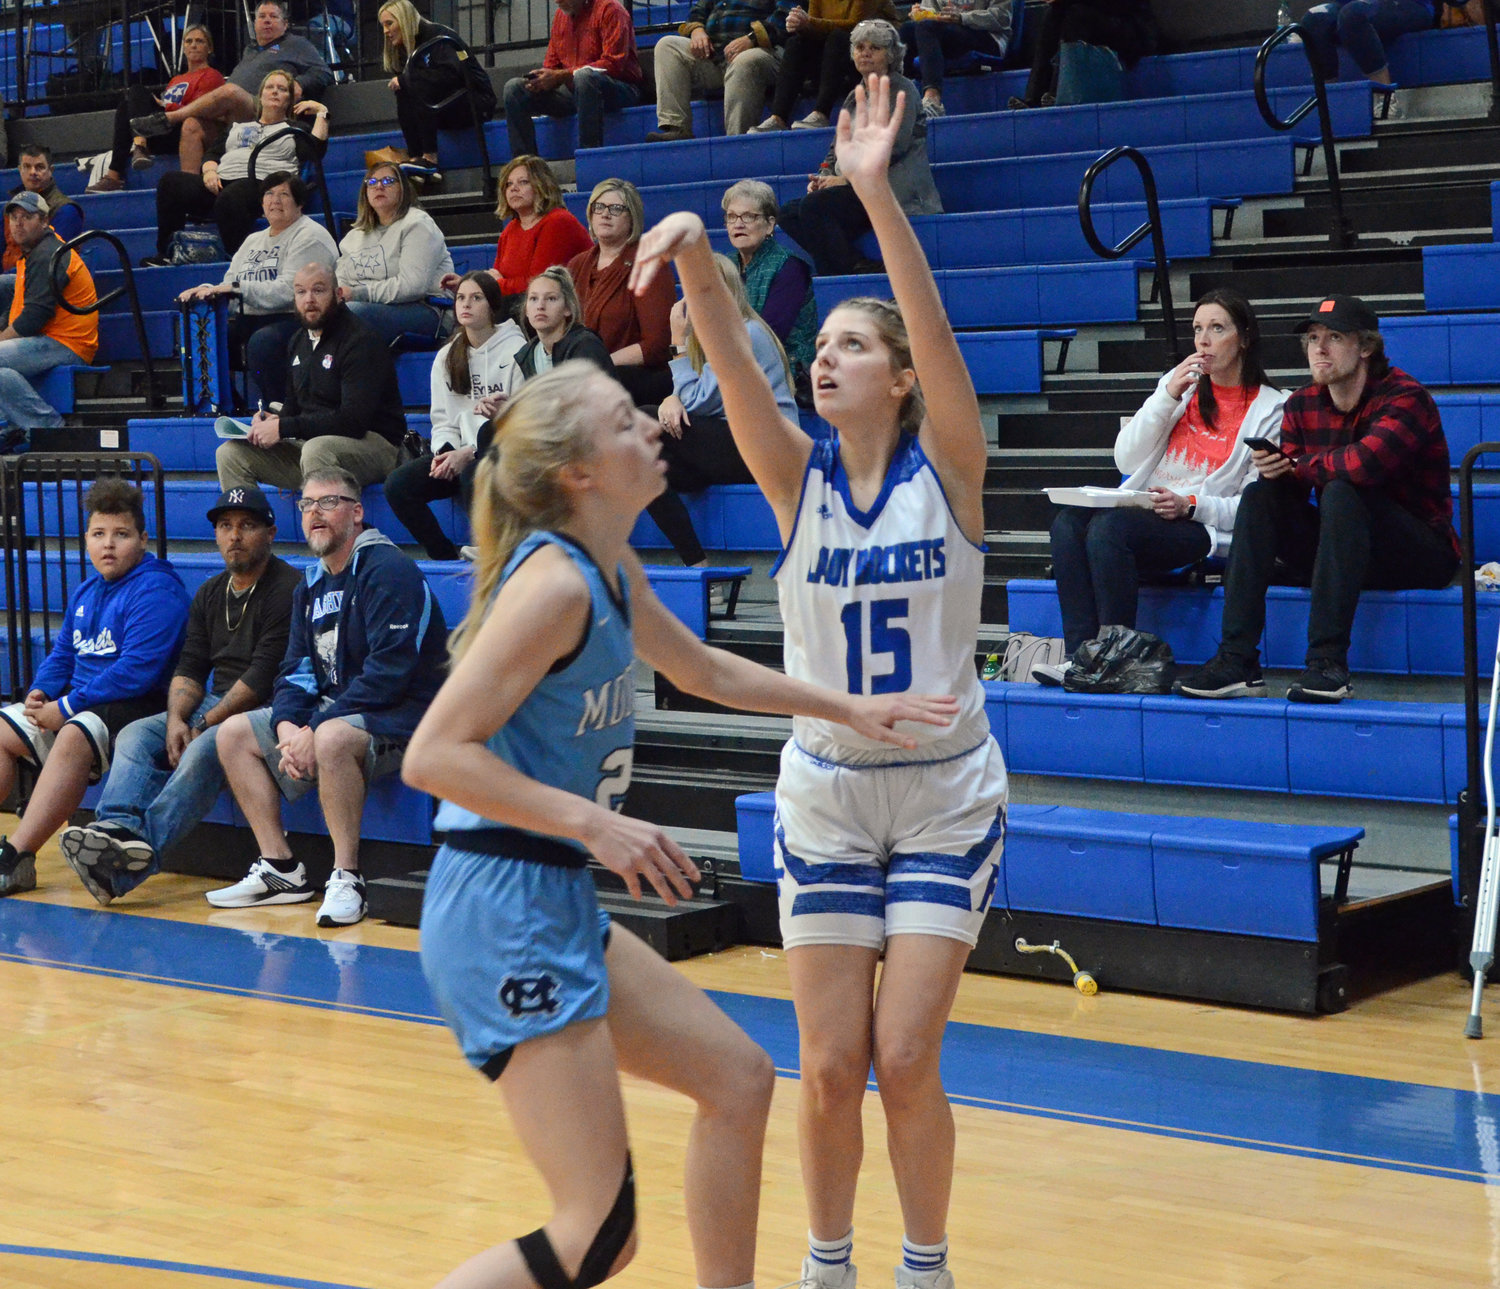 Forrest’s Megan Mealer (15) buries a 3-pointer to give the Lady Rockets a 6-2 lead Tuesday night at Chapel Hill.